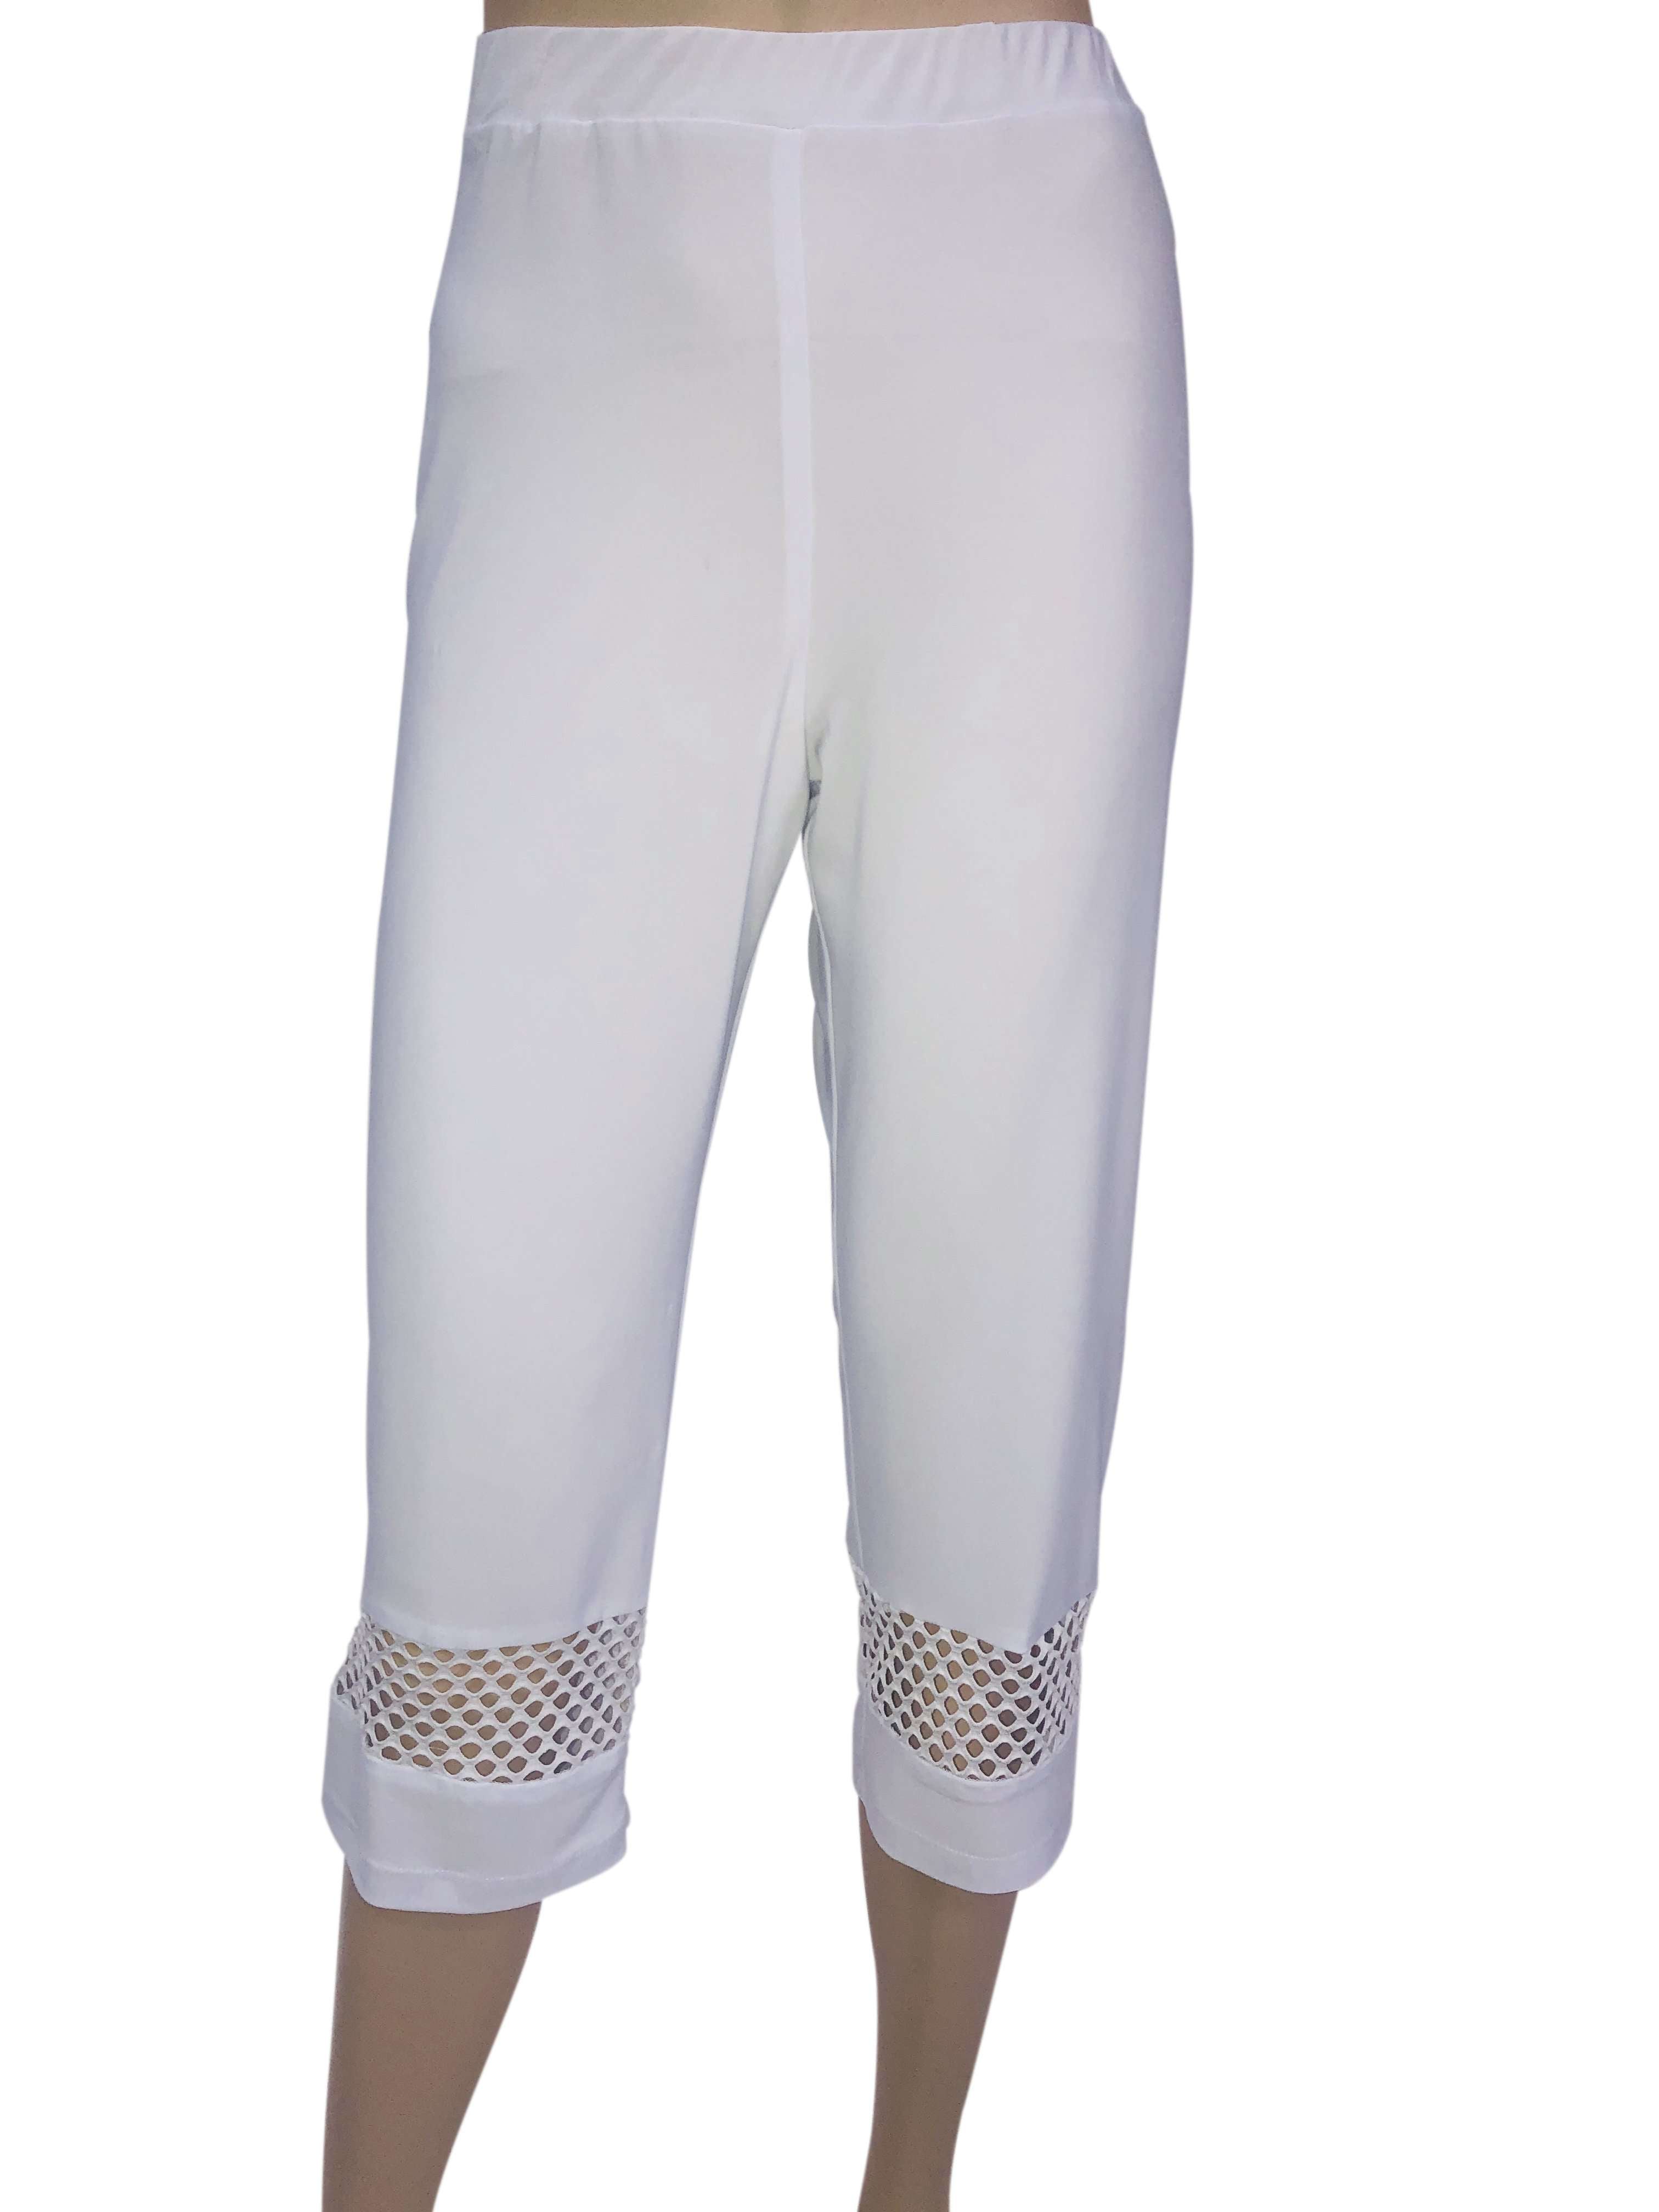 Women's Capri's White Capri Pants On Sale Lace Insert Quality Stretch Pull On Design Made In Canada On Sale 50% Off - Yvonne Marie - Yvonne Marie